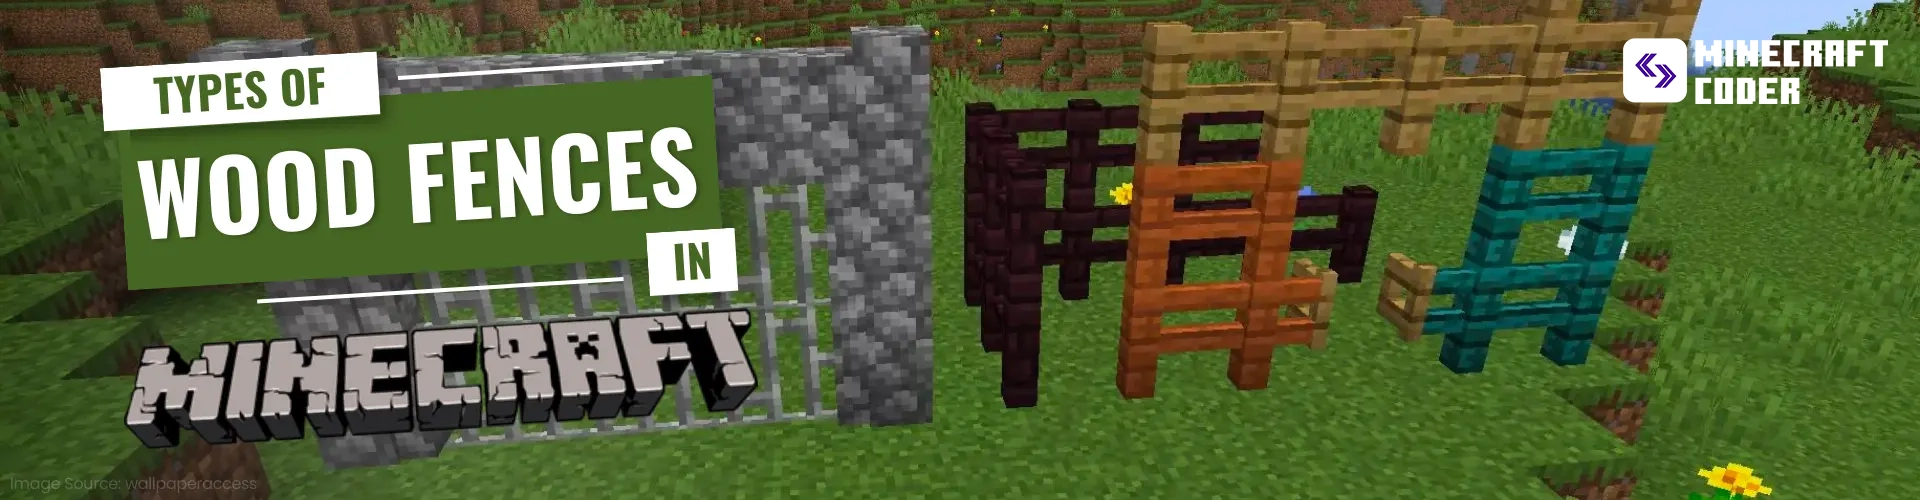 TYPES OF WOOD FENCES IN MINECRAFT